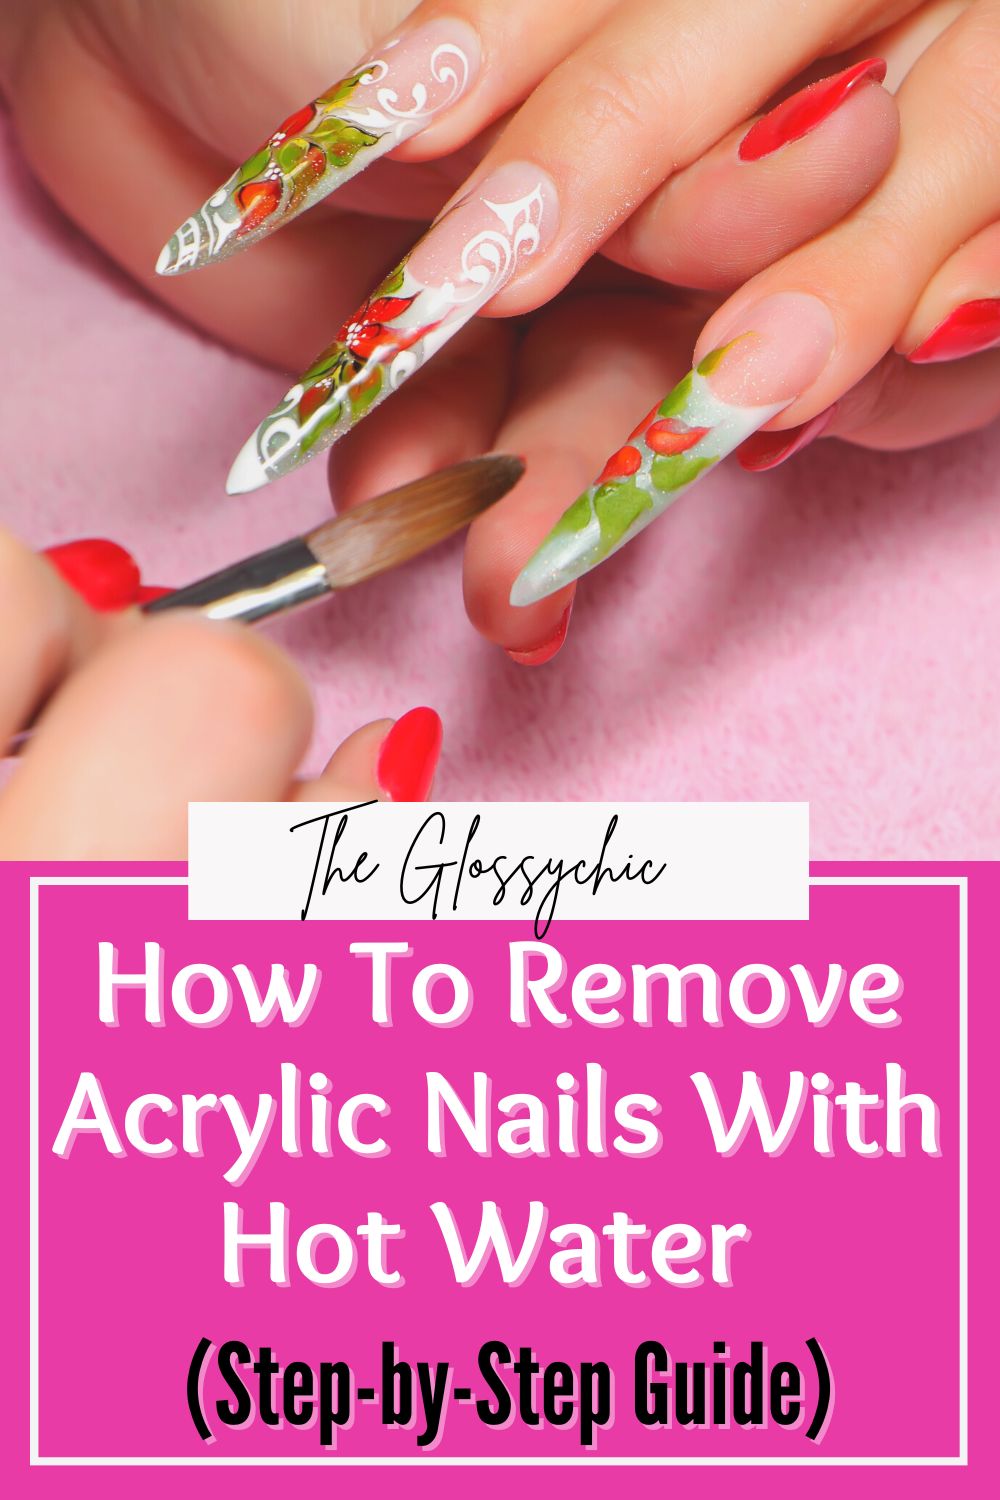 How To Remove Acrylic Nails With Hot Water (Step-by-Step Guide)